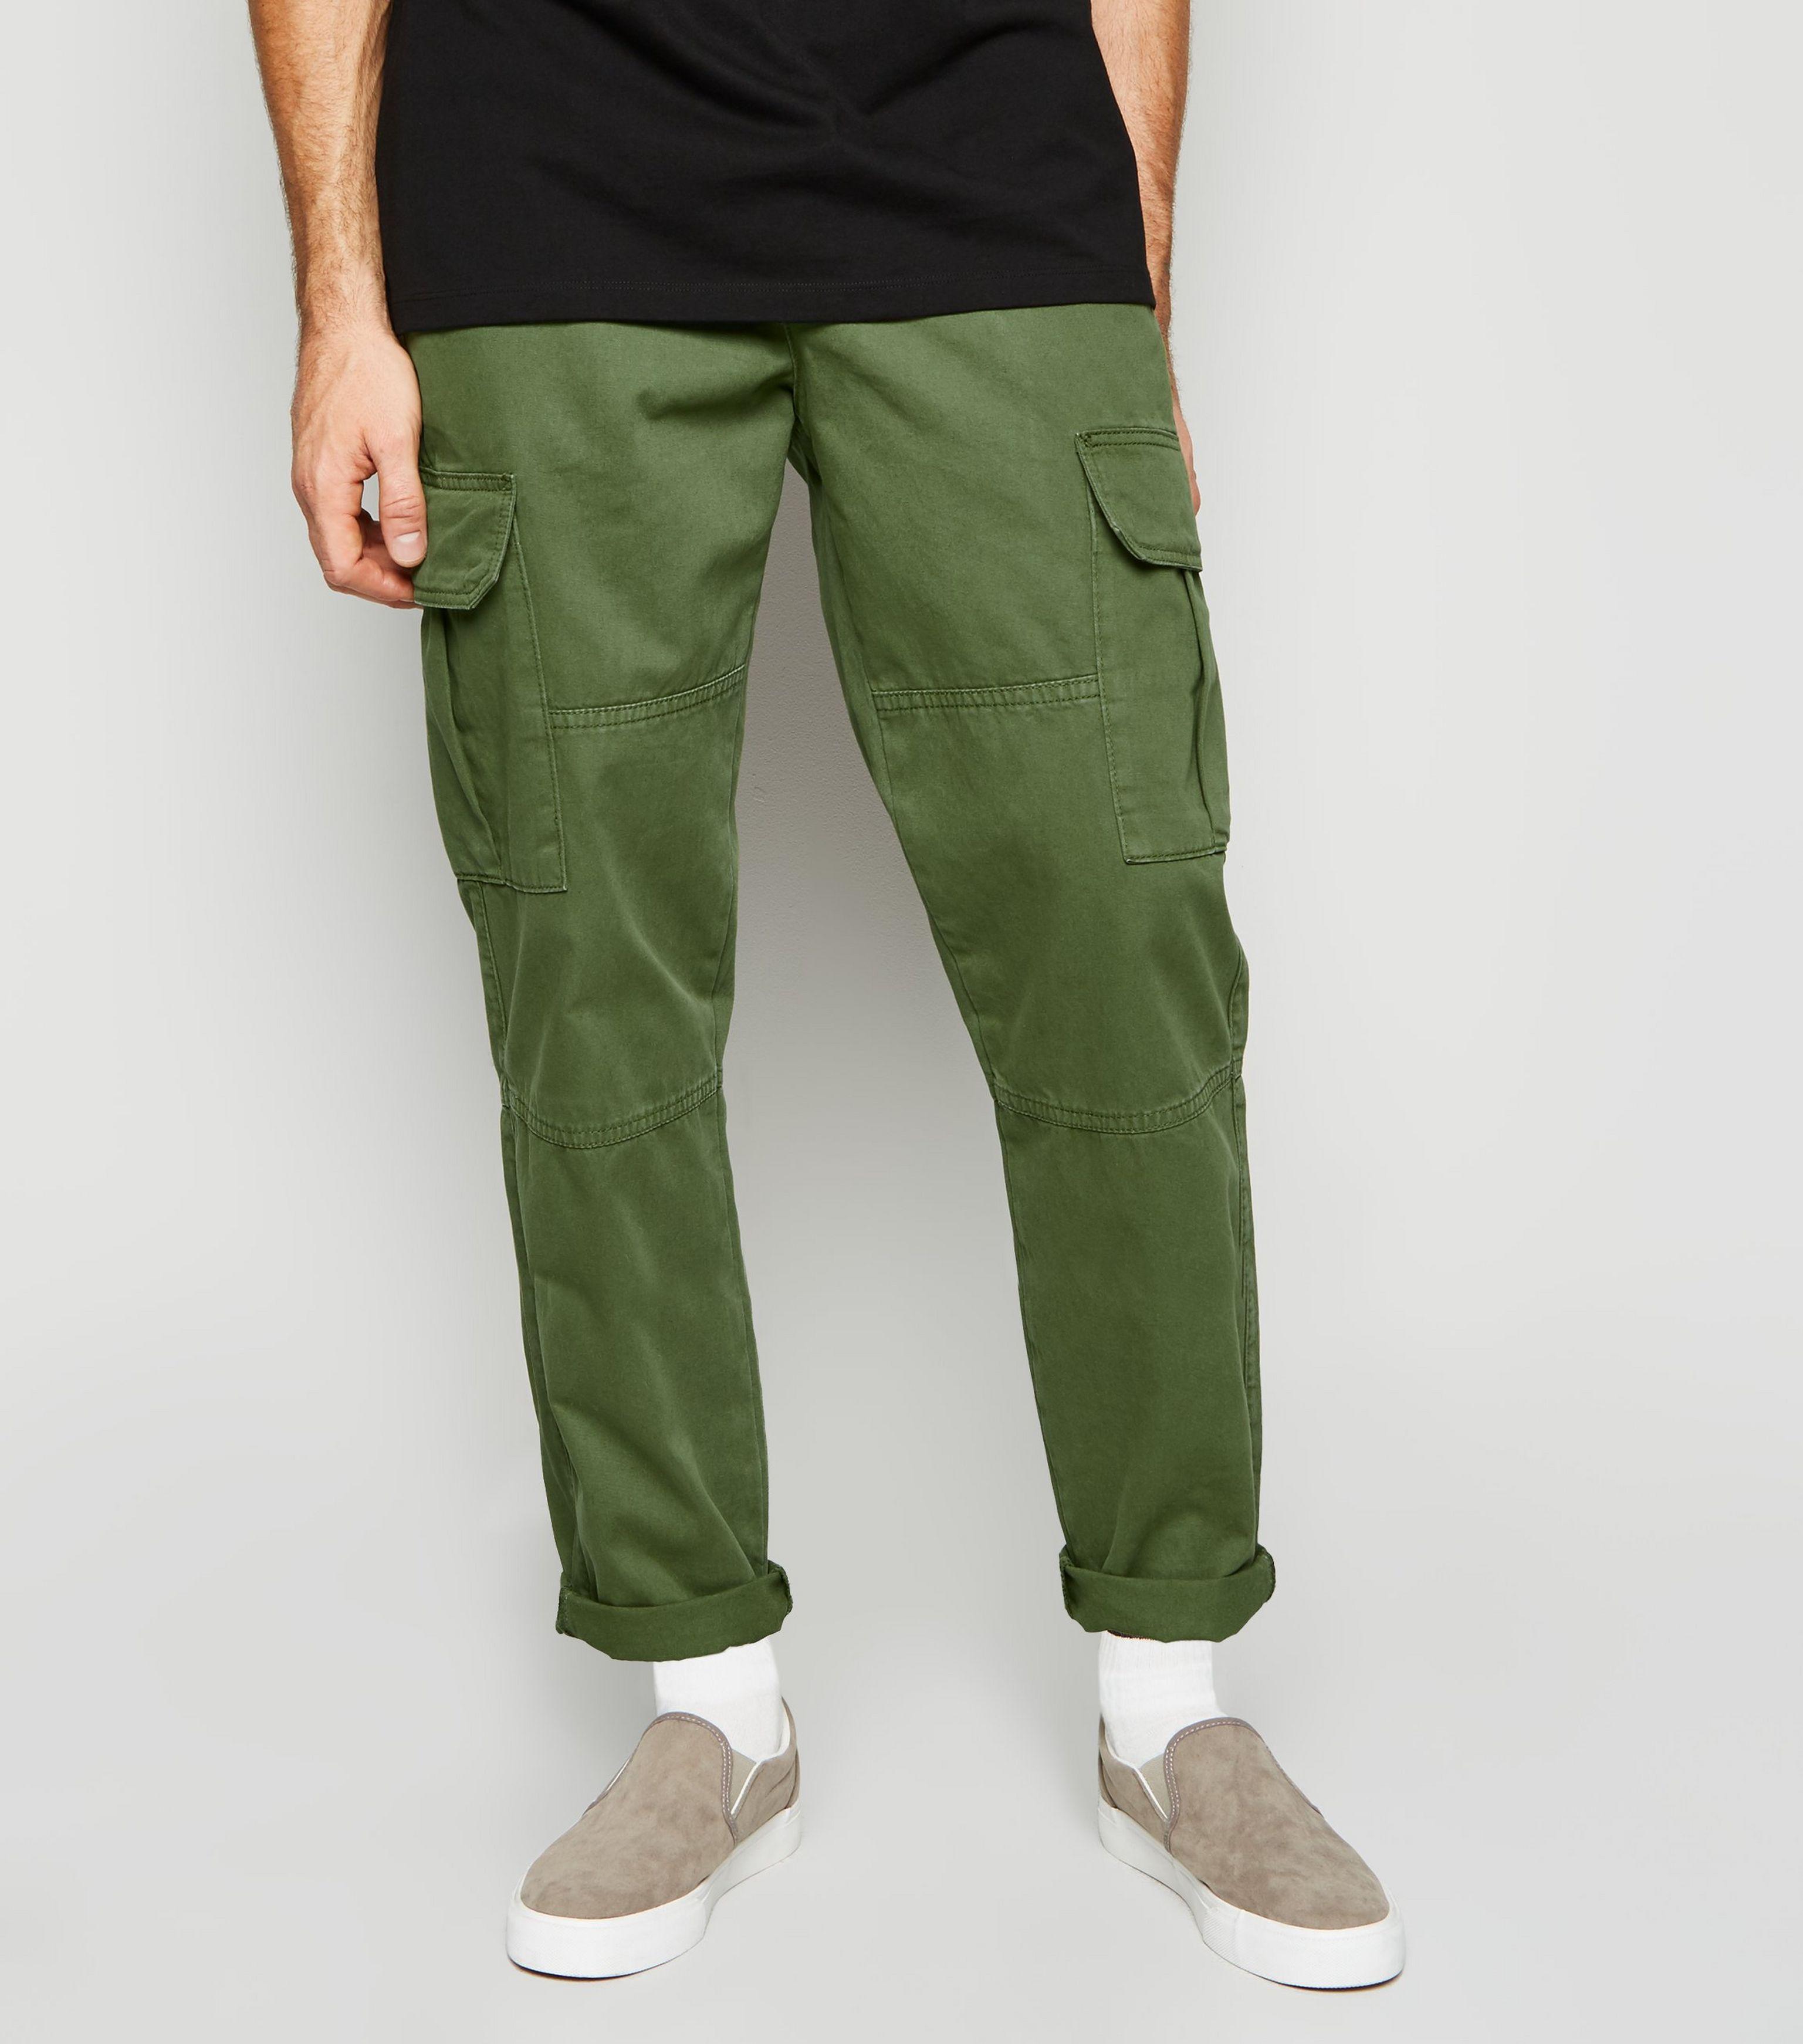 New Look Cotton Khaki Slim Cargo Trousers in Green for Men - Lyst